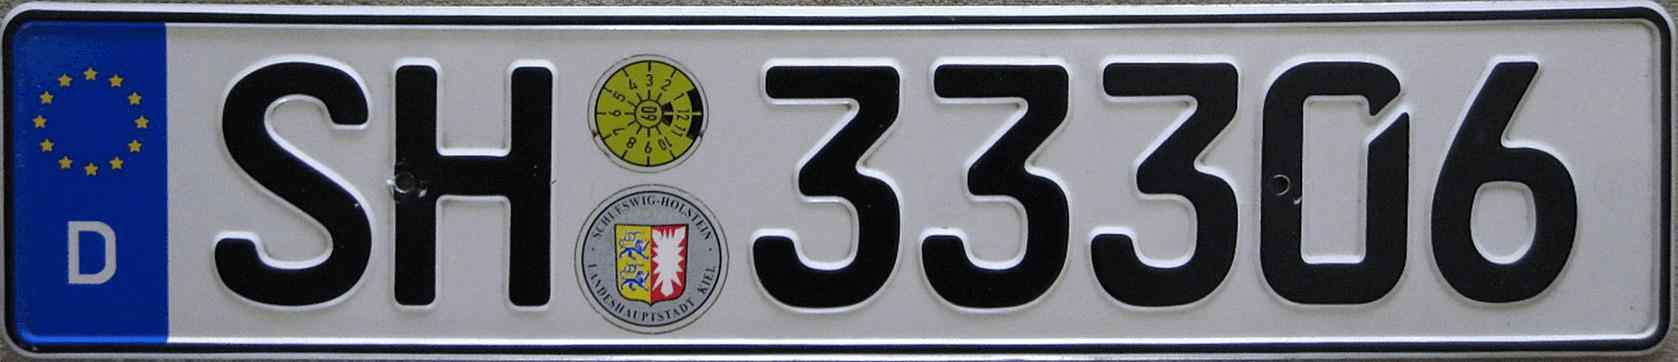 Germany License Plate 3